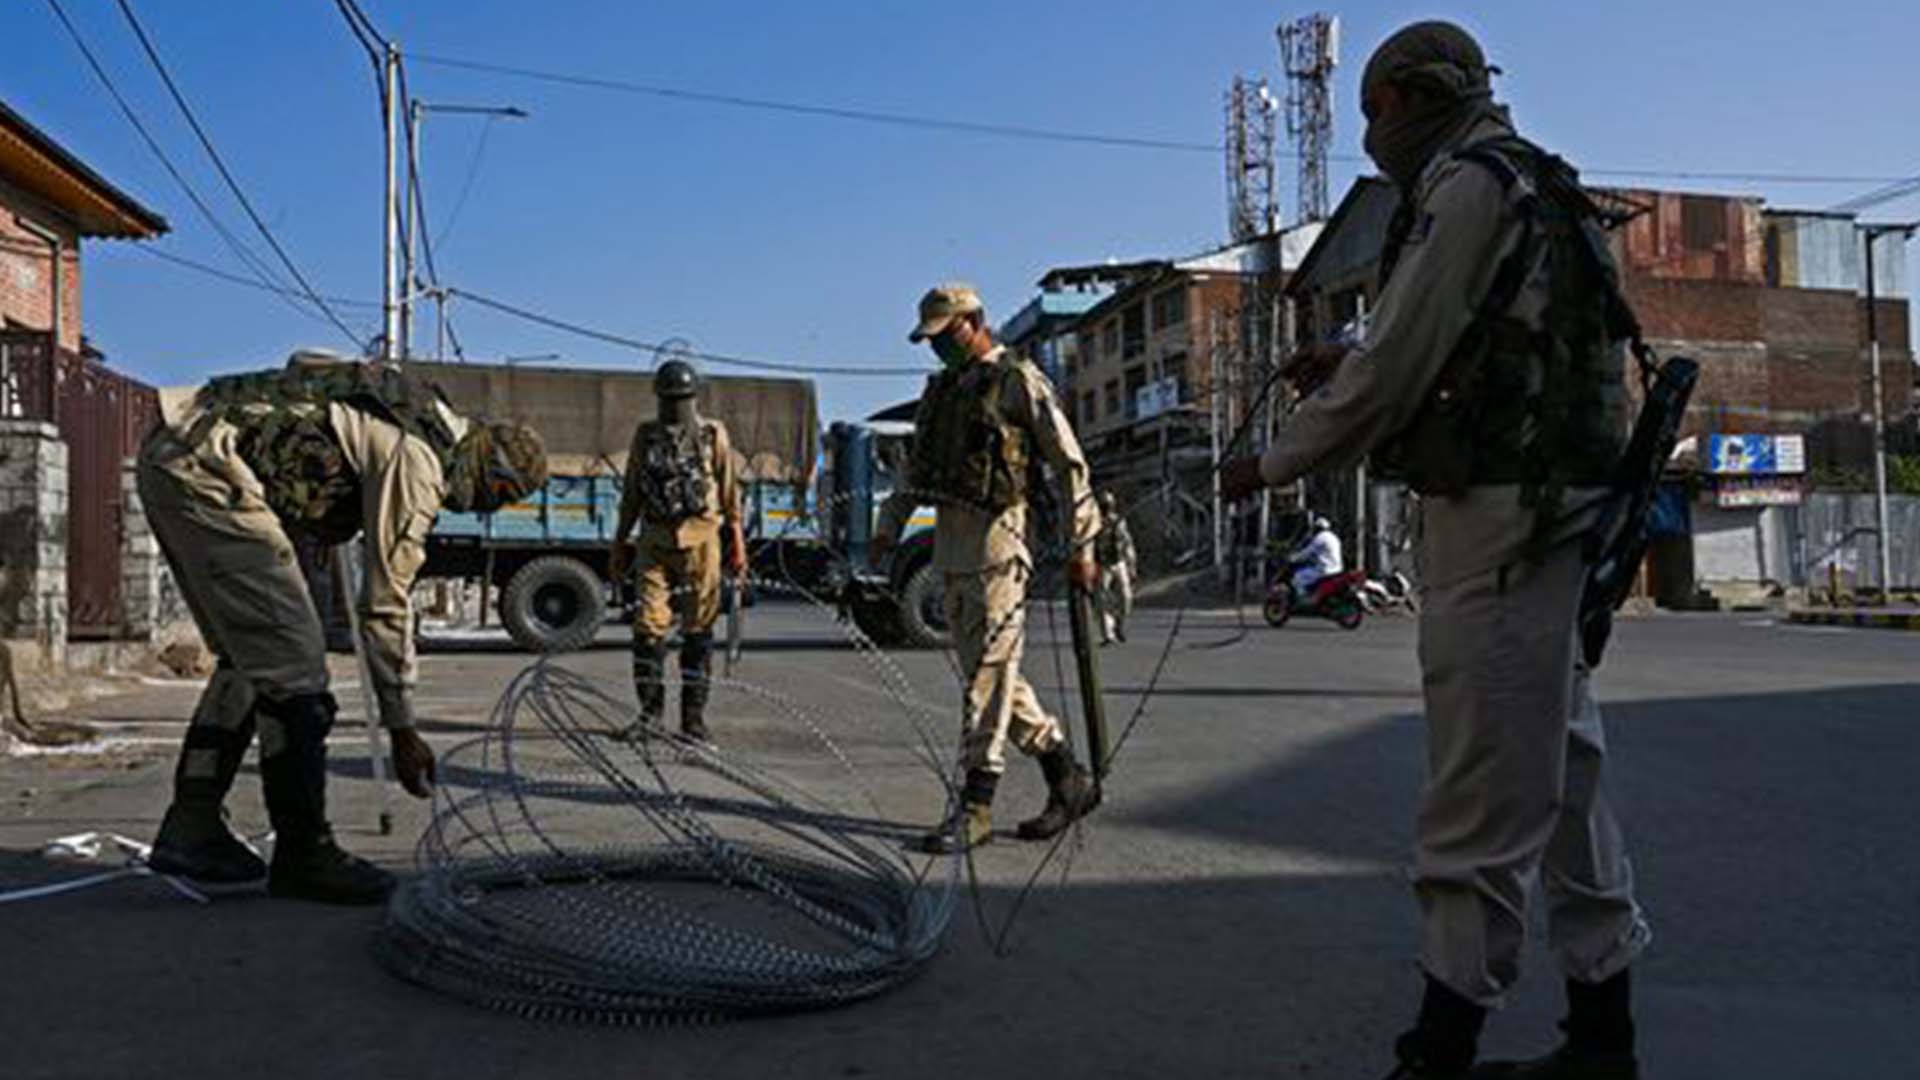 Curfew in Place as Kashmir marks one year since special status revoked